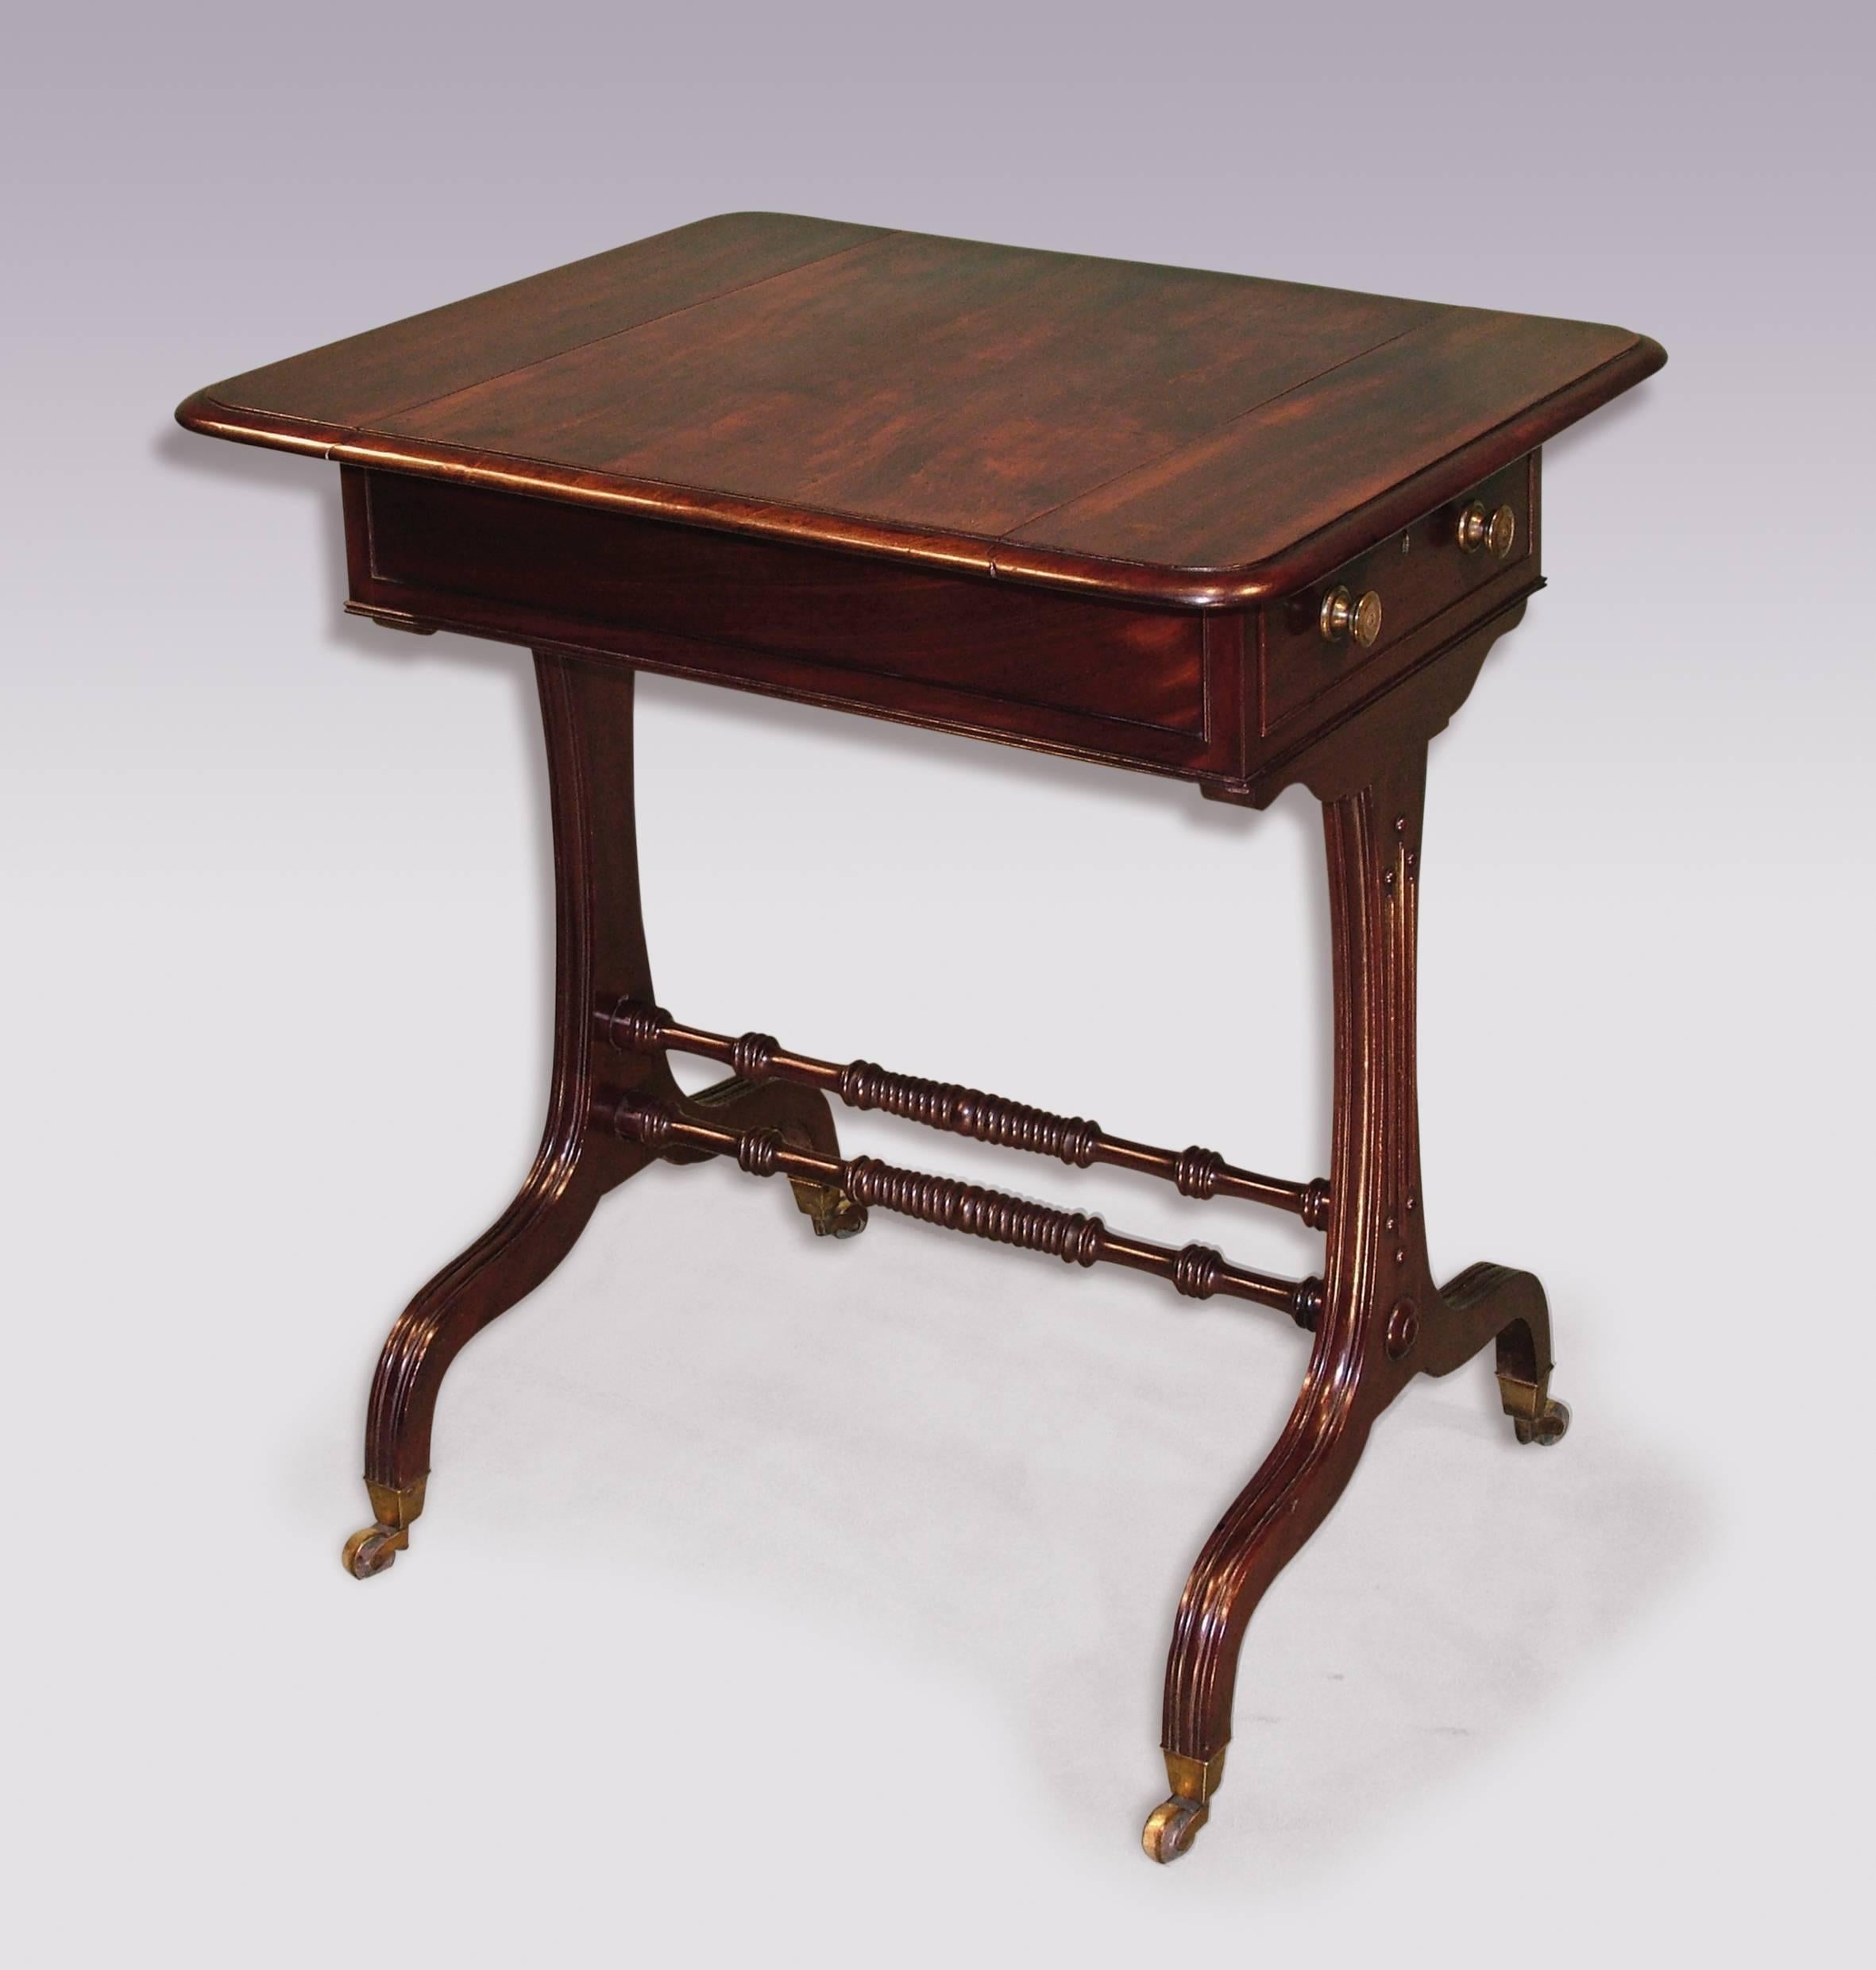 An unusual early 19th century Regency period figured mahogany side table, having moulded edged swivel top, above fitted frieze drawer and reeded umbrella shaped end supports, joined by ring turned stretchers, retaining original brass castors.